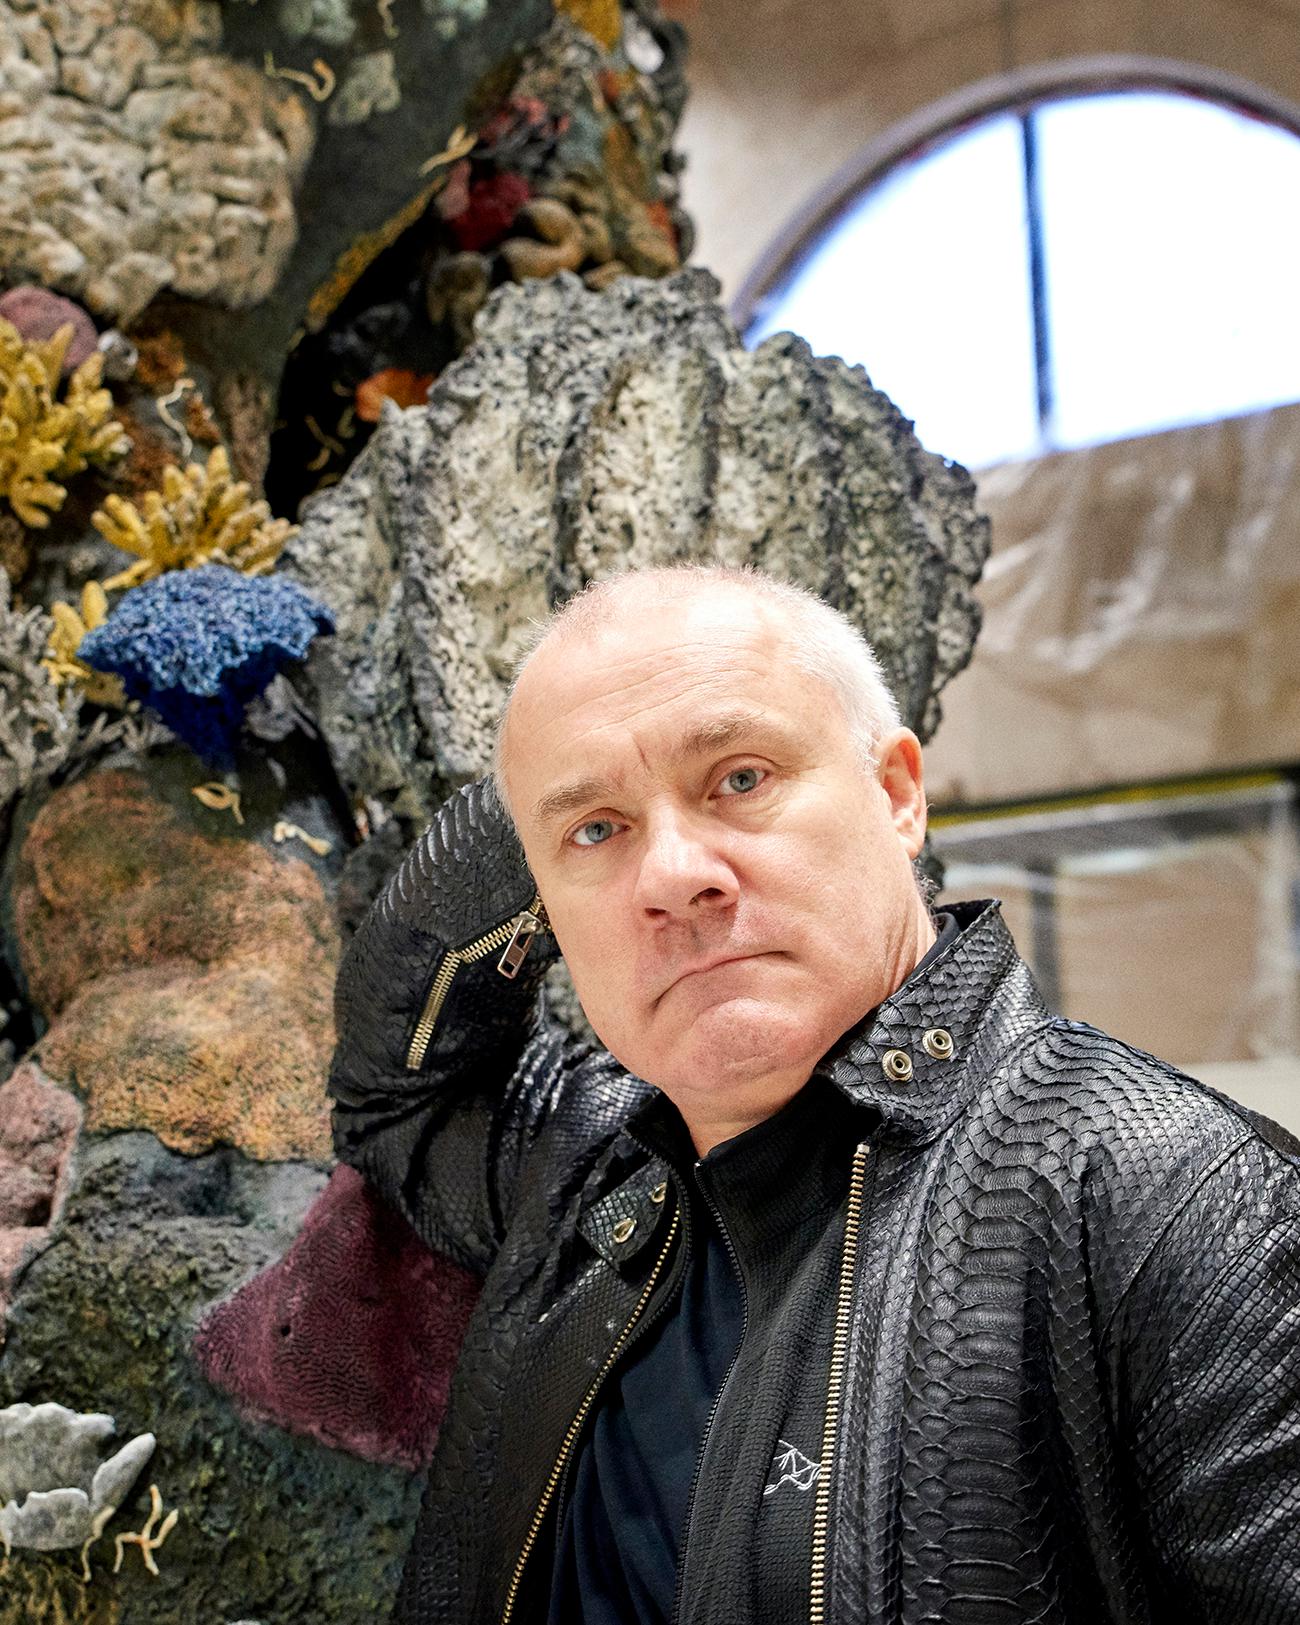 Damien Hirst net worth — Sunday Times Rich List 2020 The Sunday Times